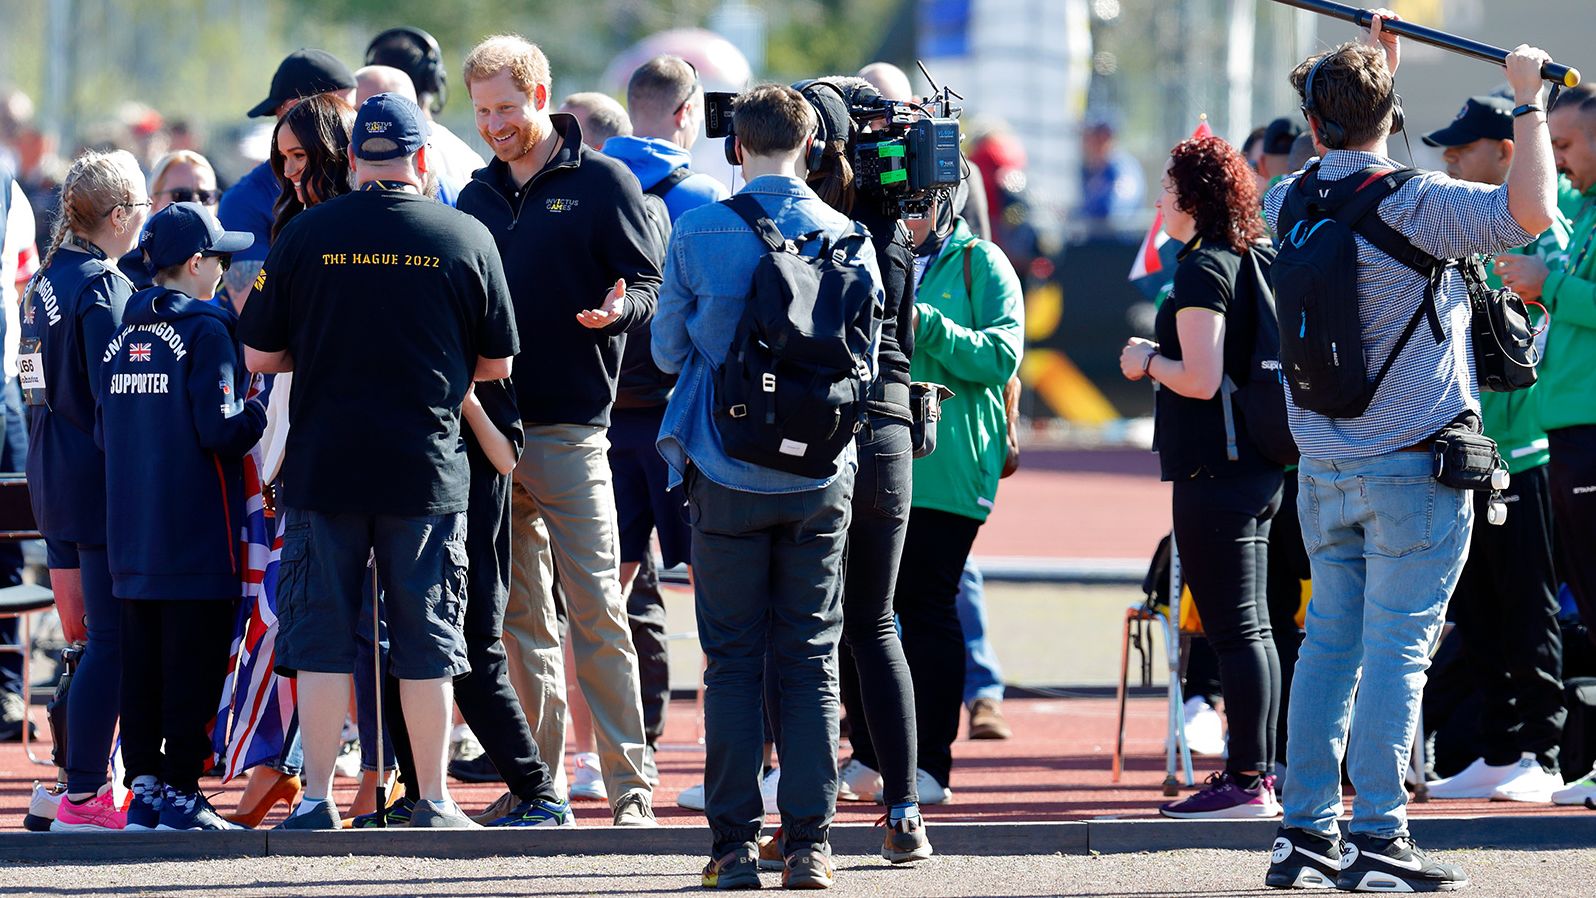 The Sussexes were accompanied by a film crew during a visit to The Hague, Netherlands in April.